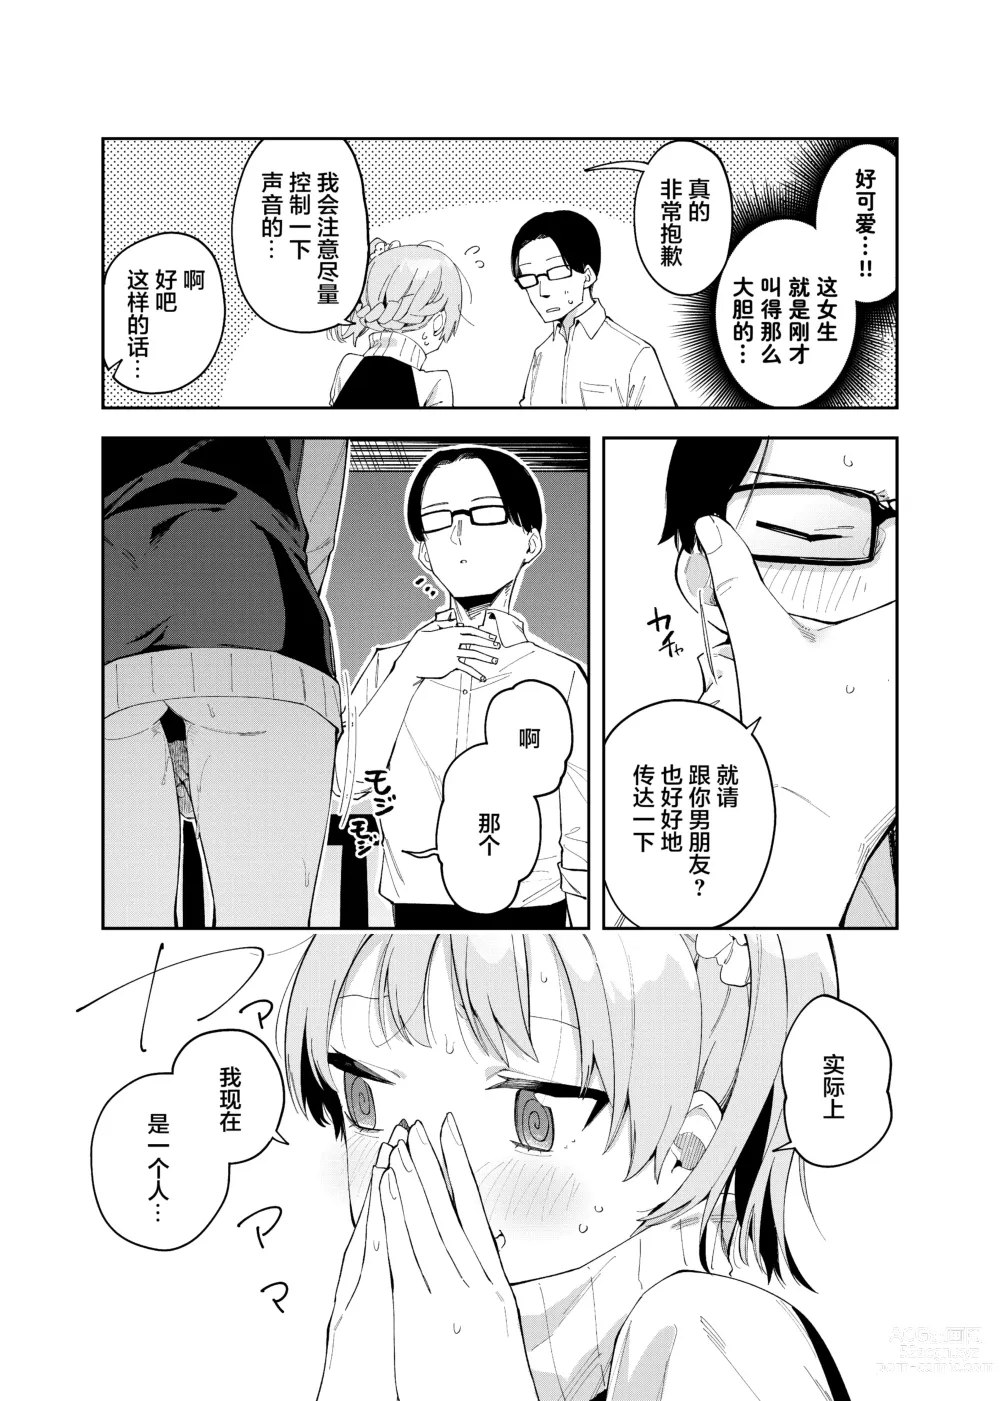 Page 6 of doujinshi 隣人は有名配信者2